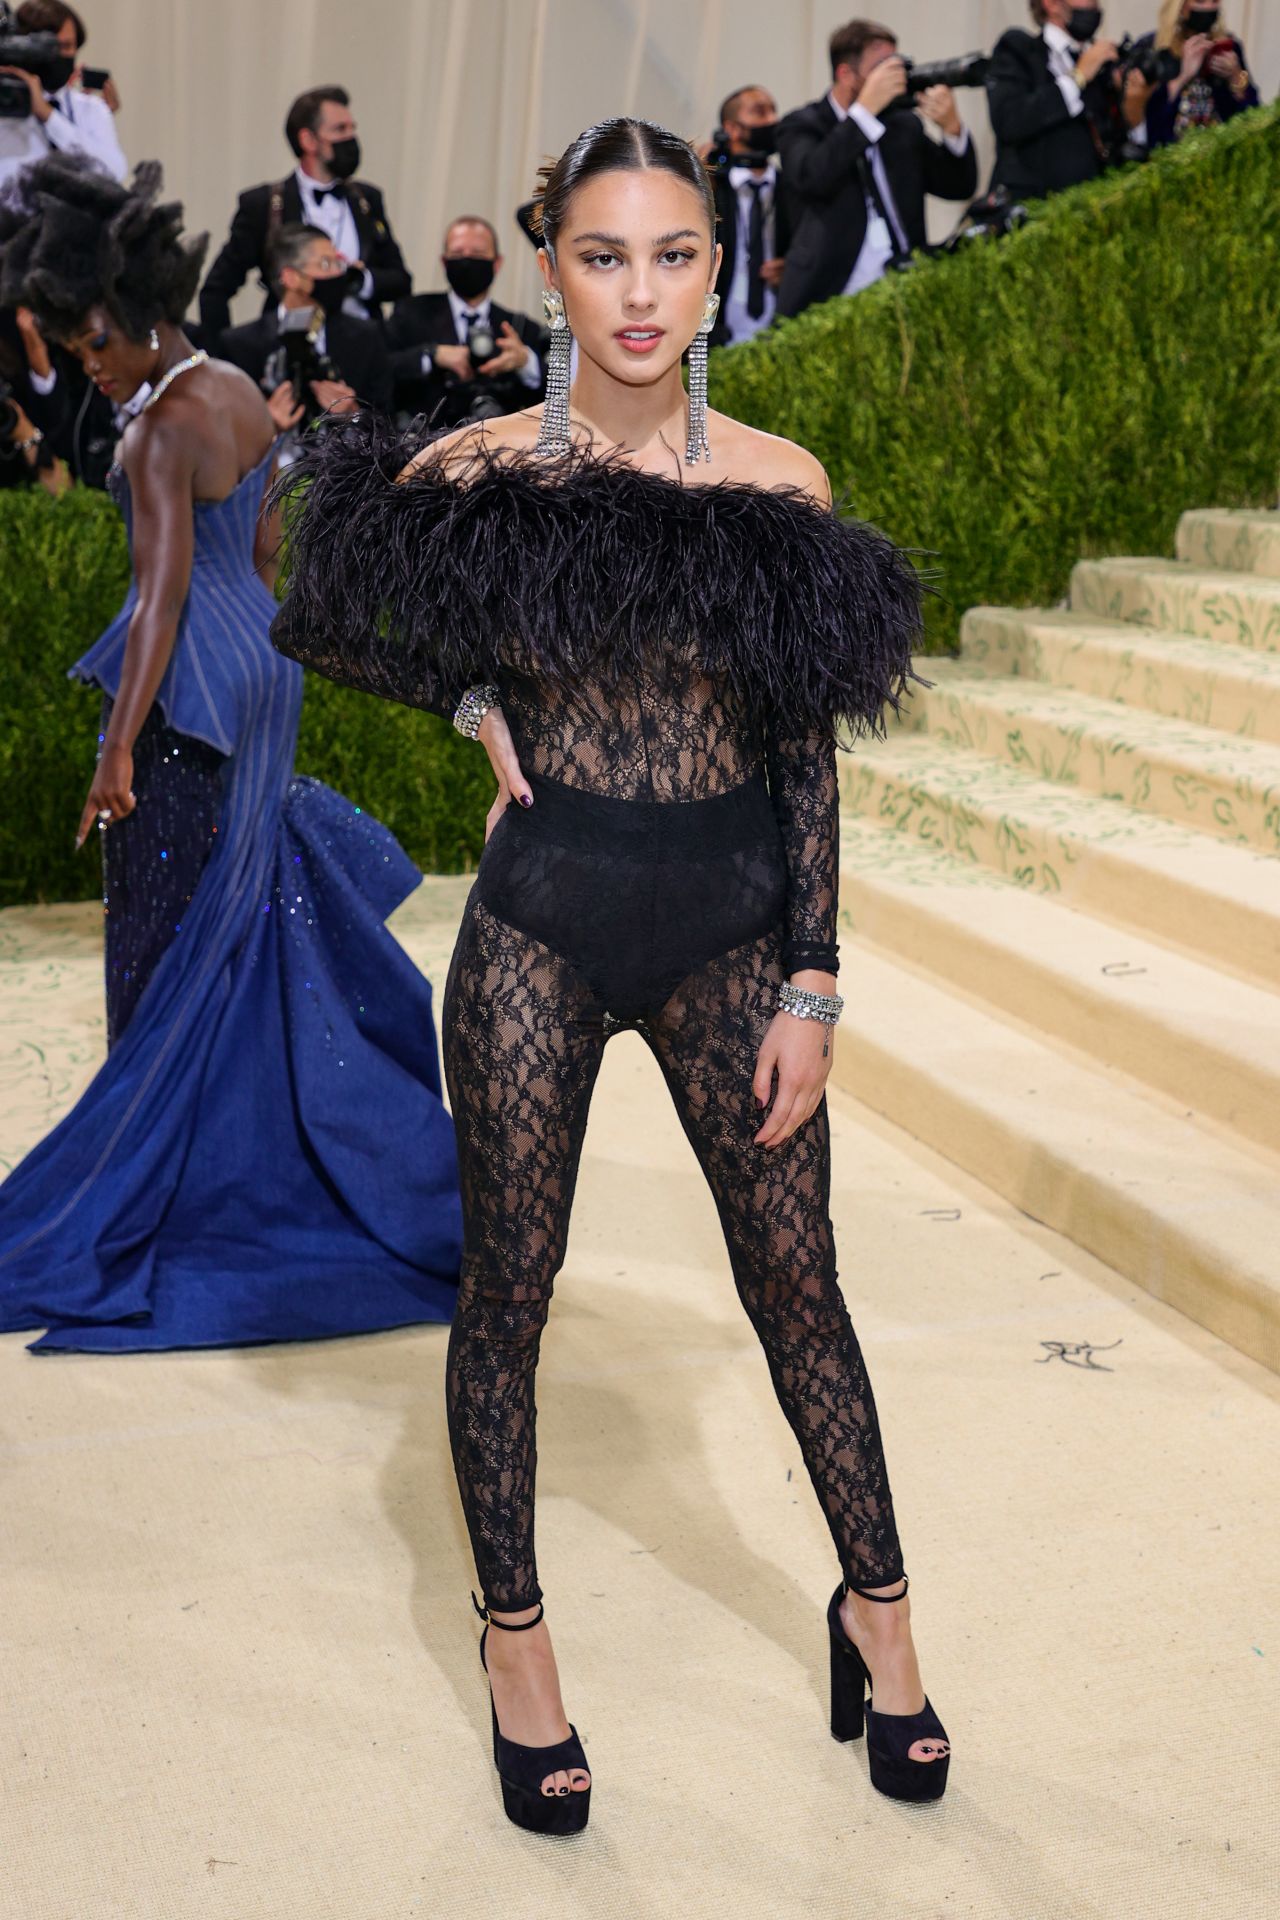 Opinion Aoc And Kim Kardashian Seize An Opportunity At The Met Gala Cnn